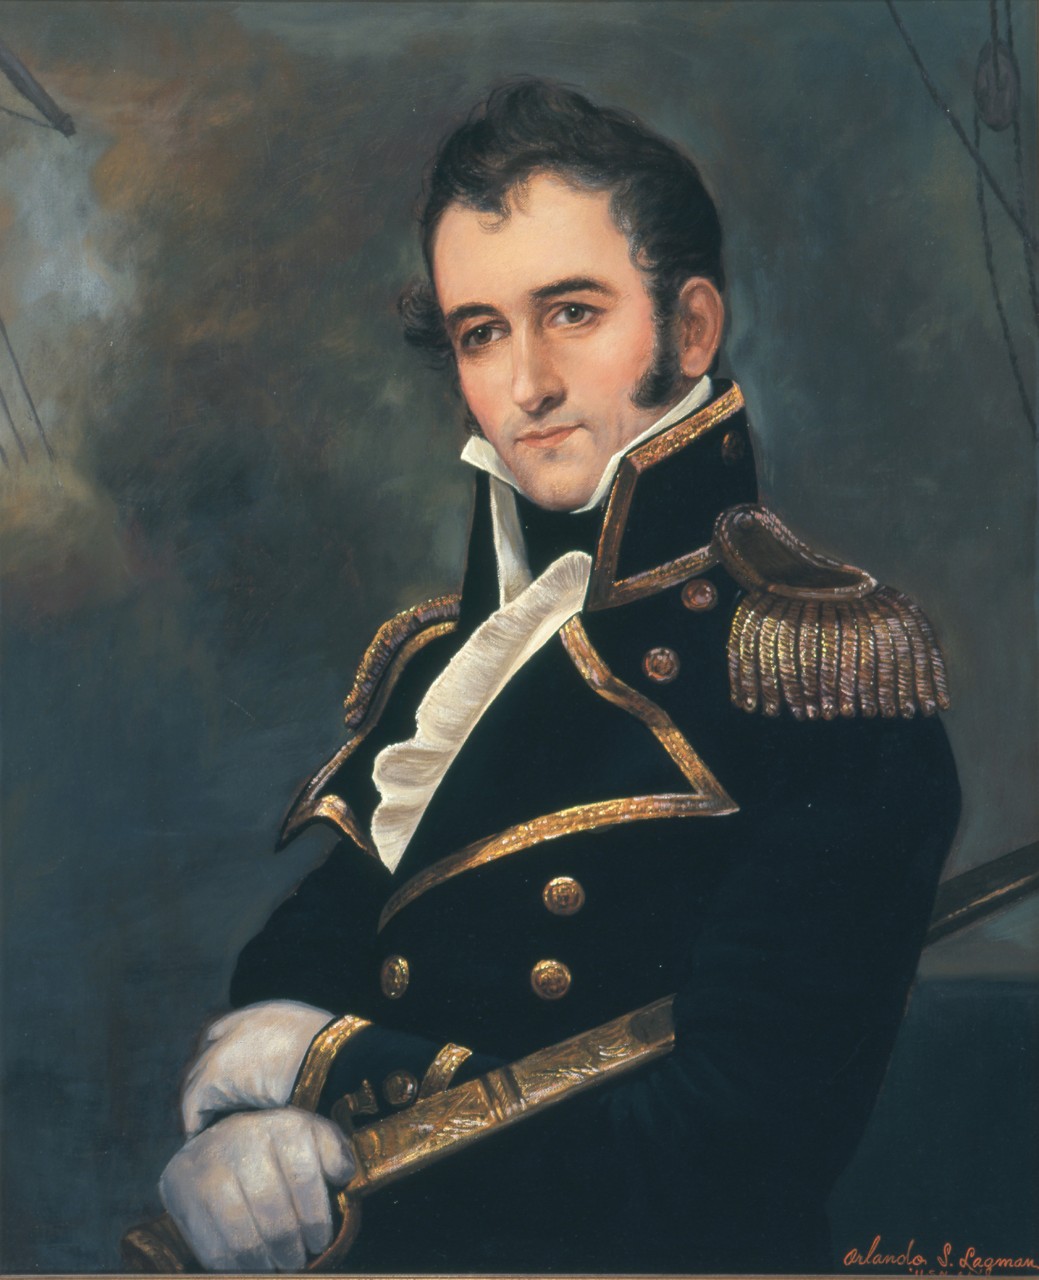 Portrait of David Porter, he is wearing a naval uniform and holding a sword with a smokey background